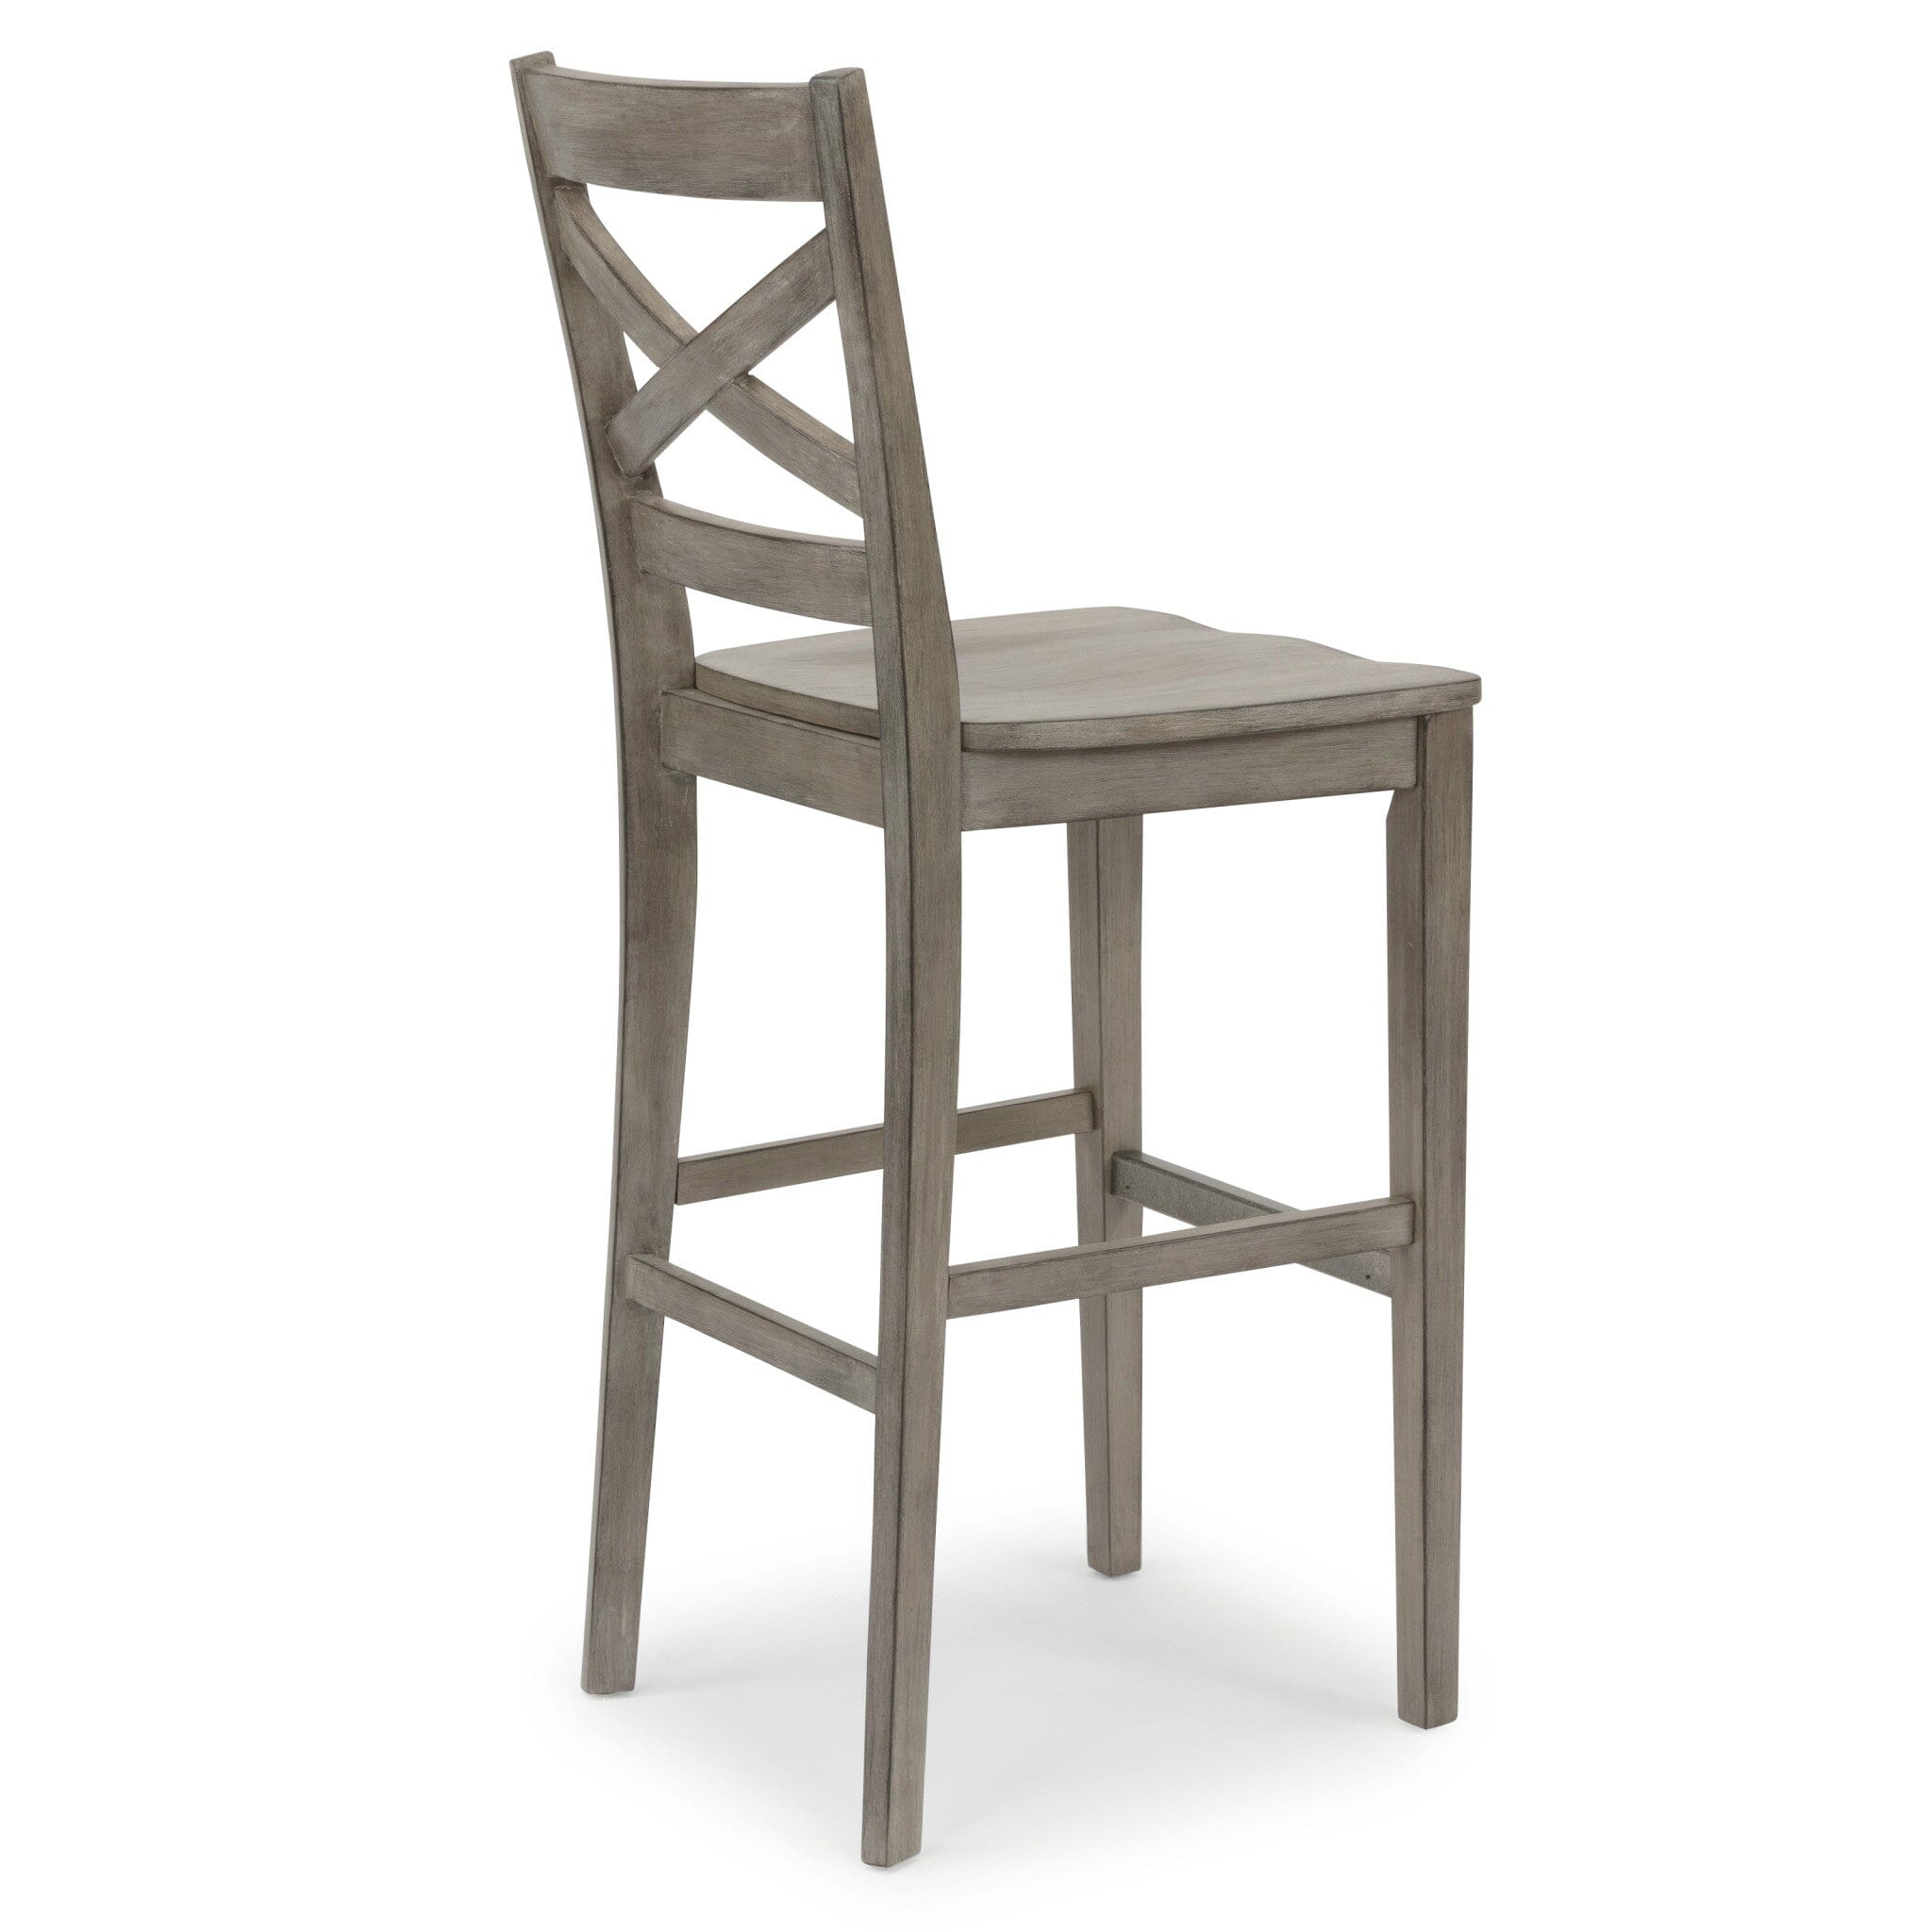 Rustic Farmhouse Bar Stool By Mountain Lodge Dining Table & Chairs Mountain Lodge